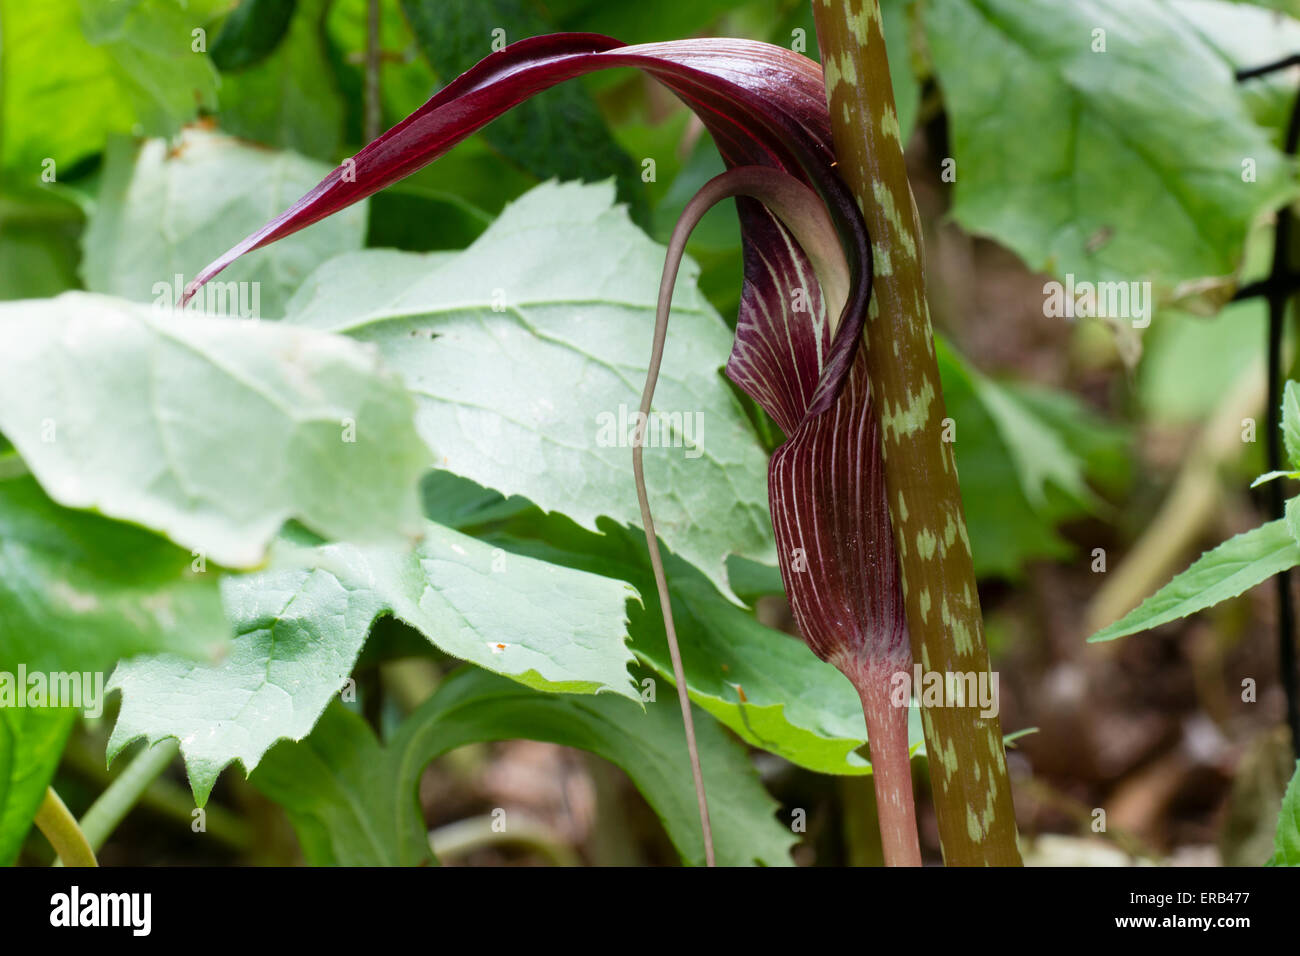 Striped spathe and elongated spadix contrast with the blotched stem of Arisaema speciosa Stock Photo